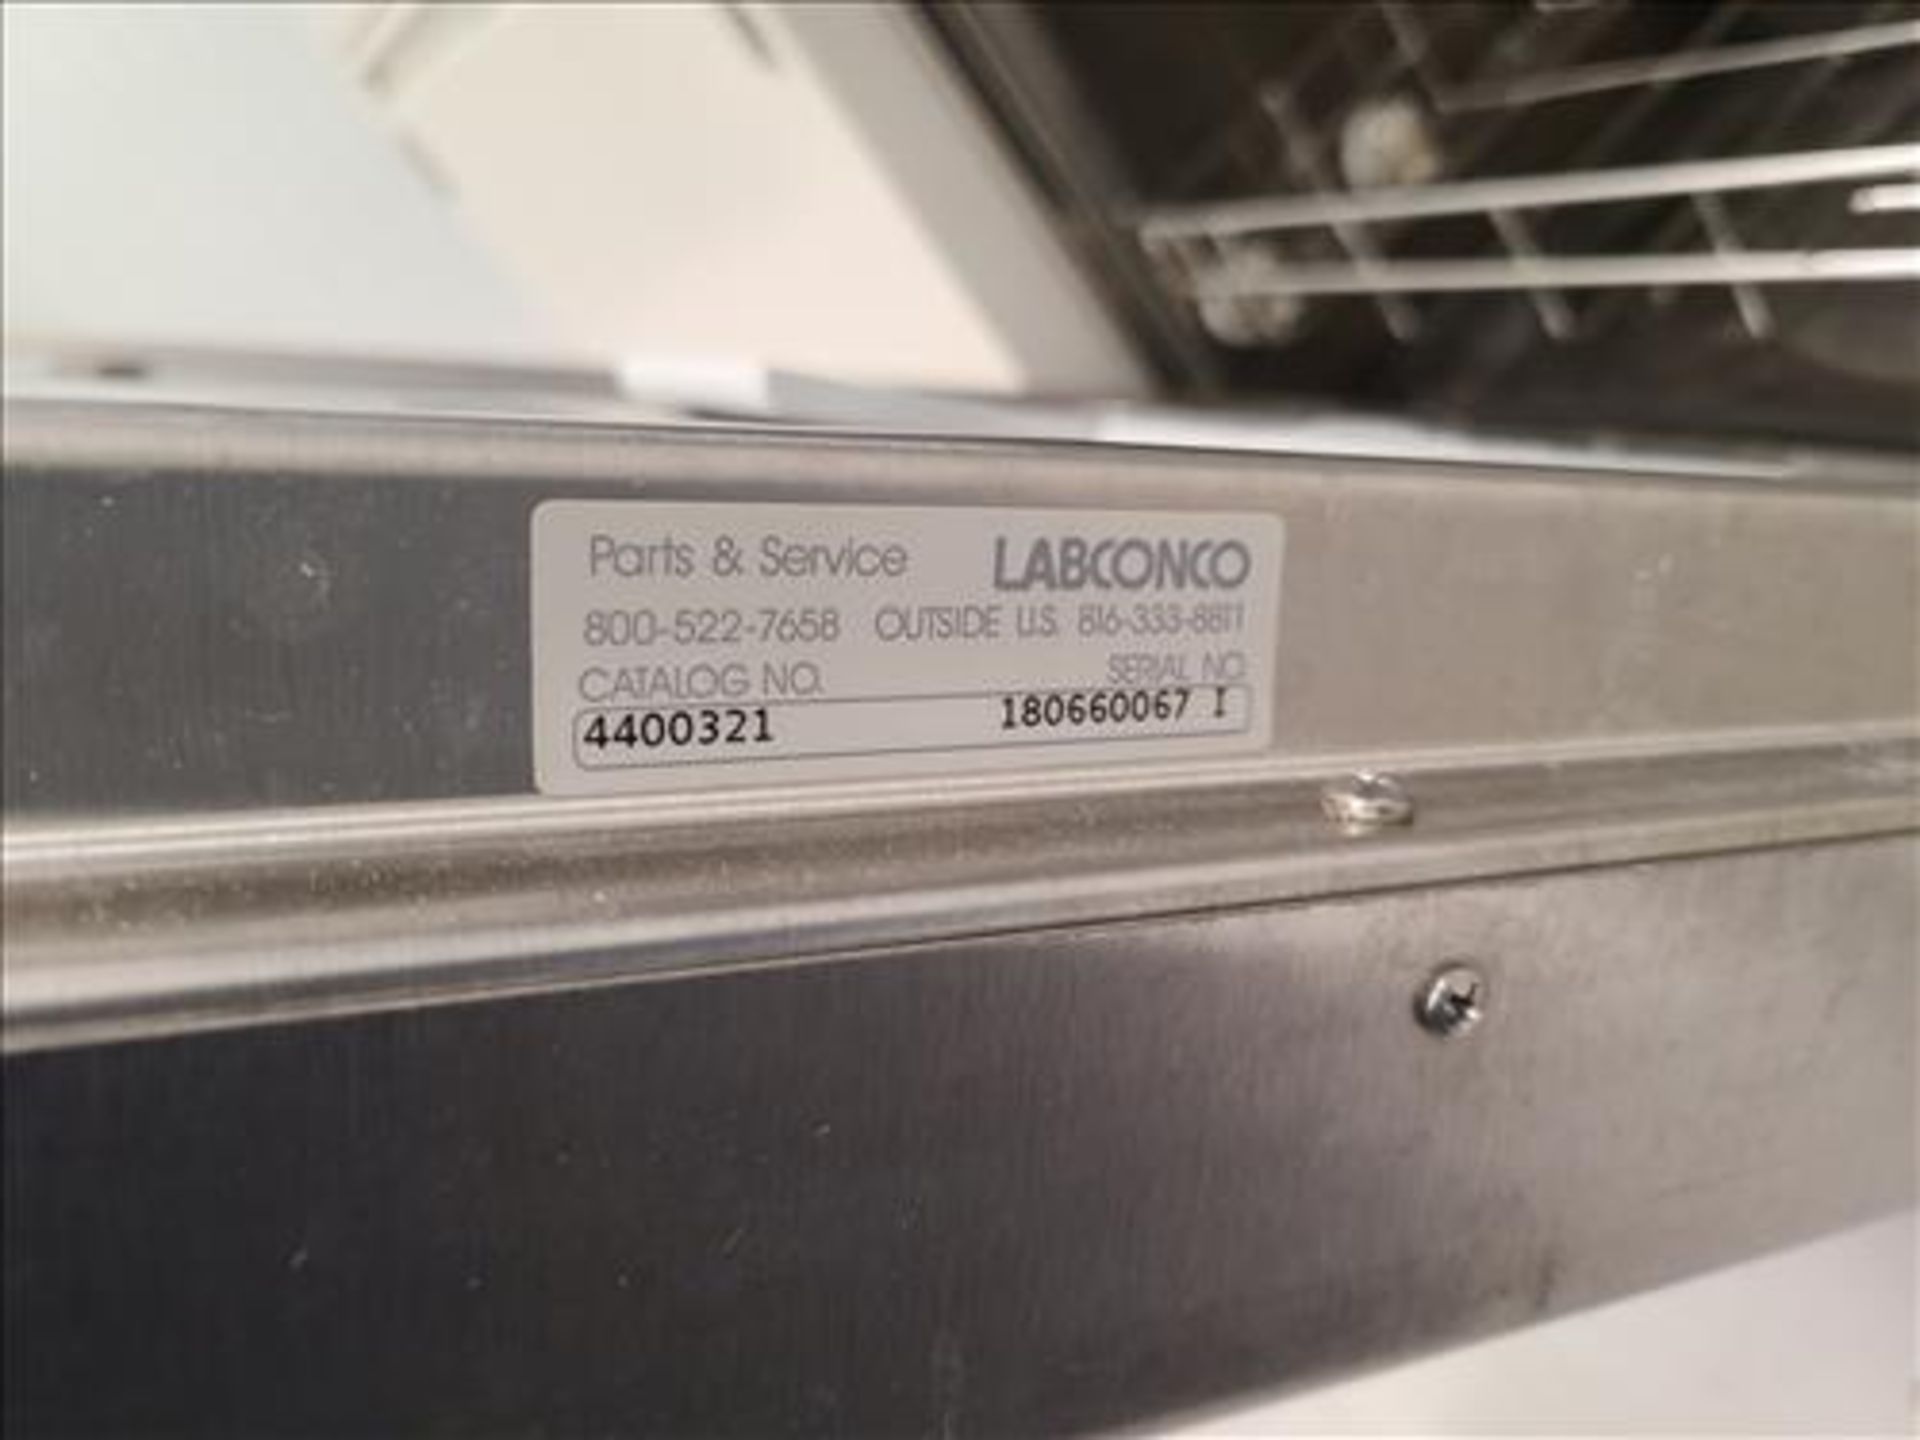 Labconco Steam Scrubber glass washer [Loc. Packaging 1, Lab] - Image 4 of 4